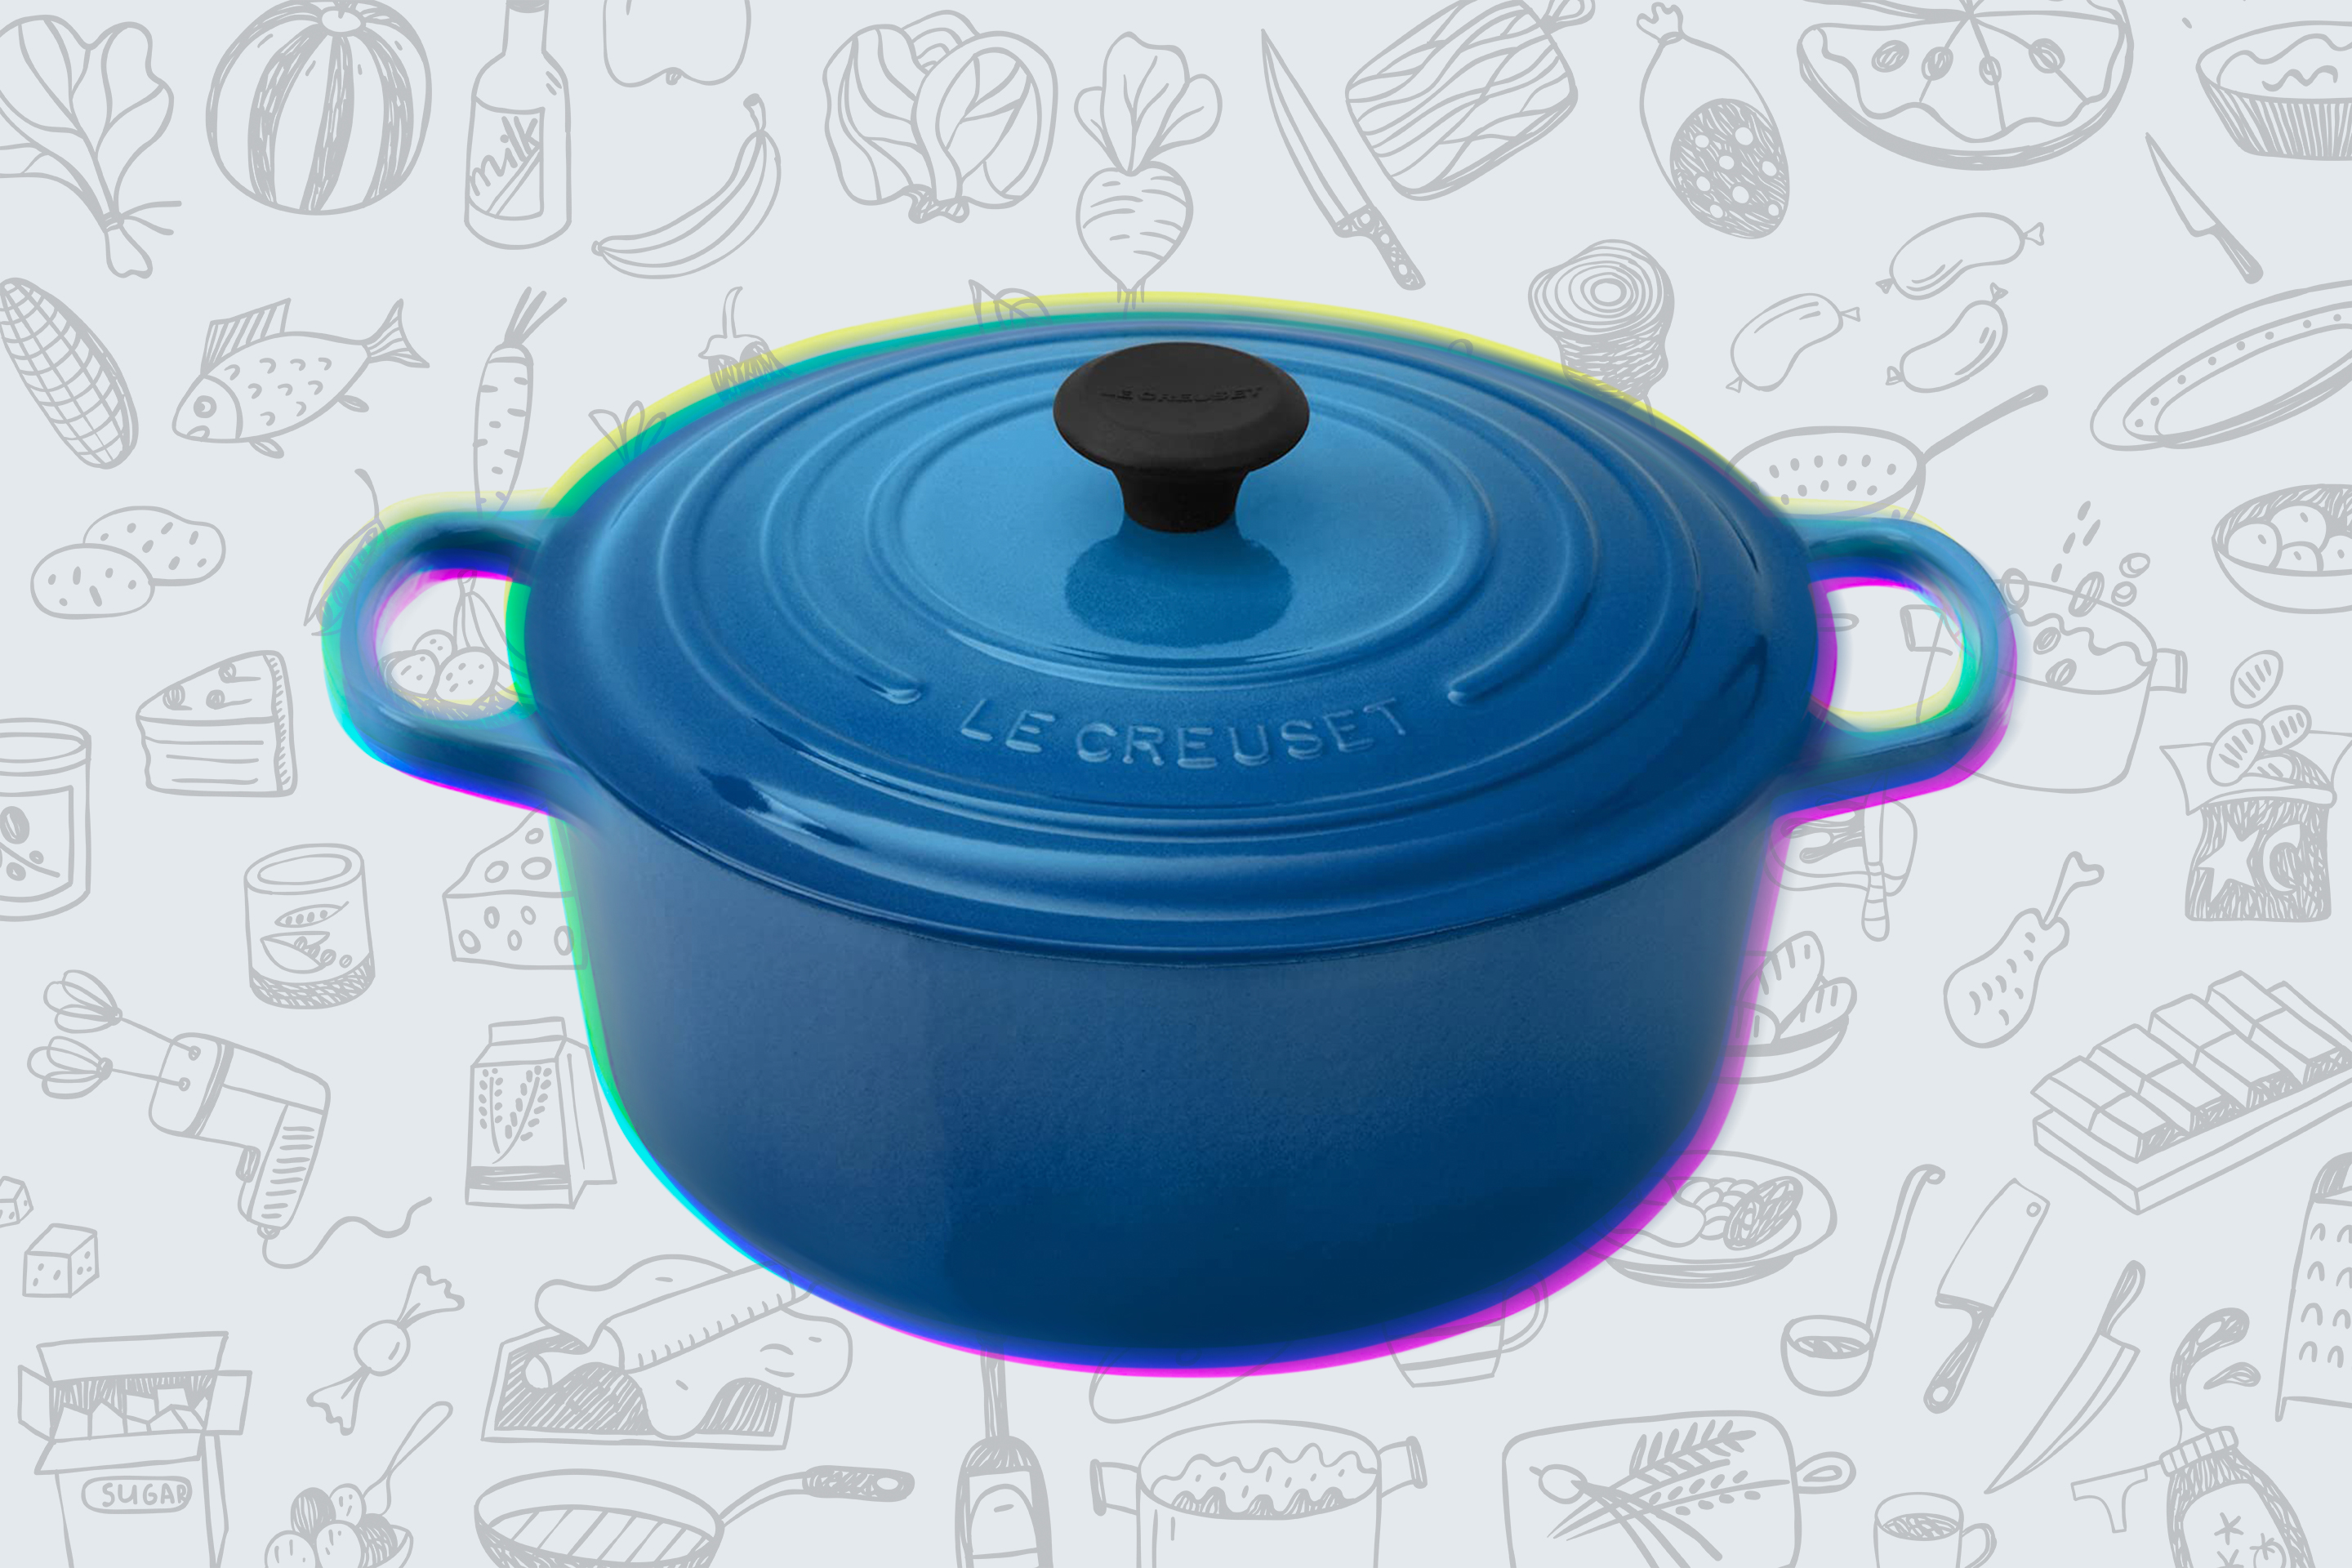 The Best Dutch Oven (2023), Reviewed by Our Experts